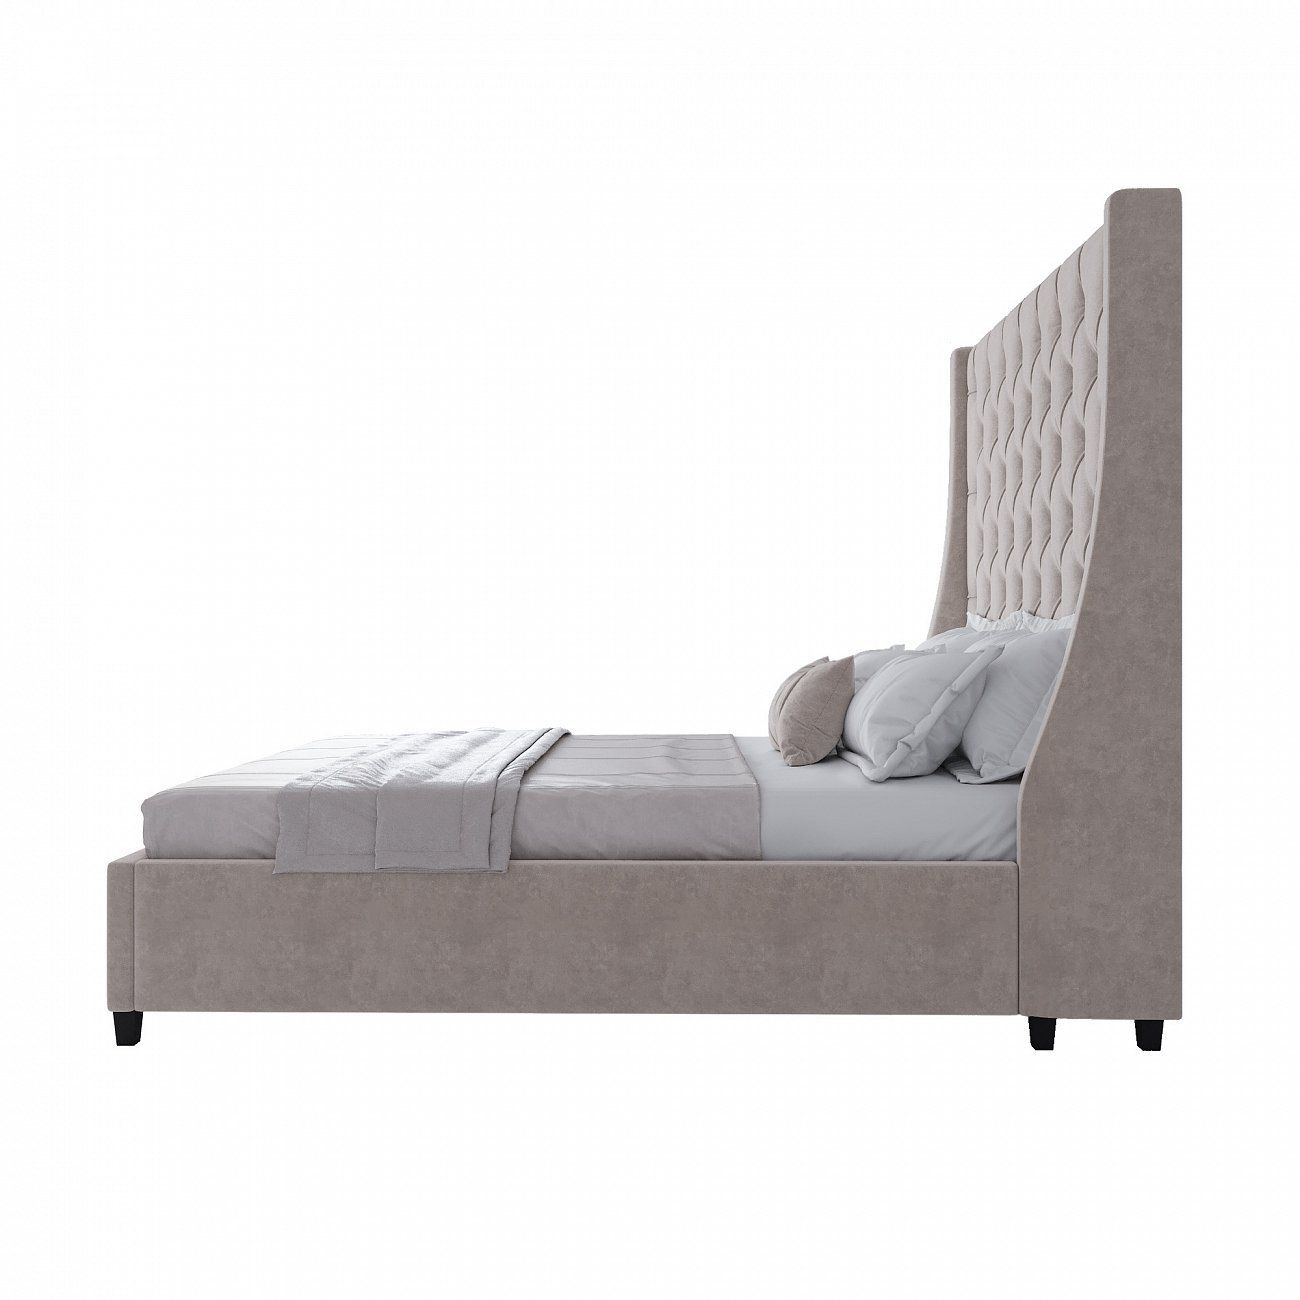 Ada double bed with upholstered headboard 160x200 cm grey